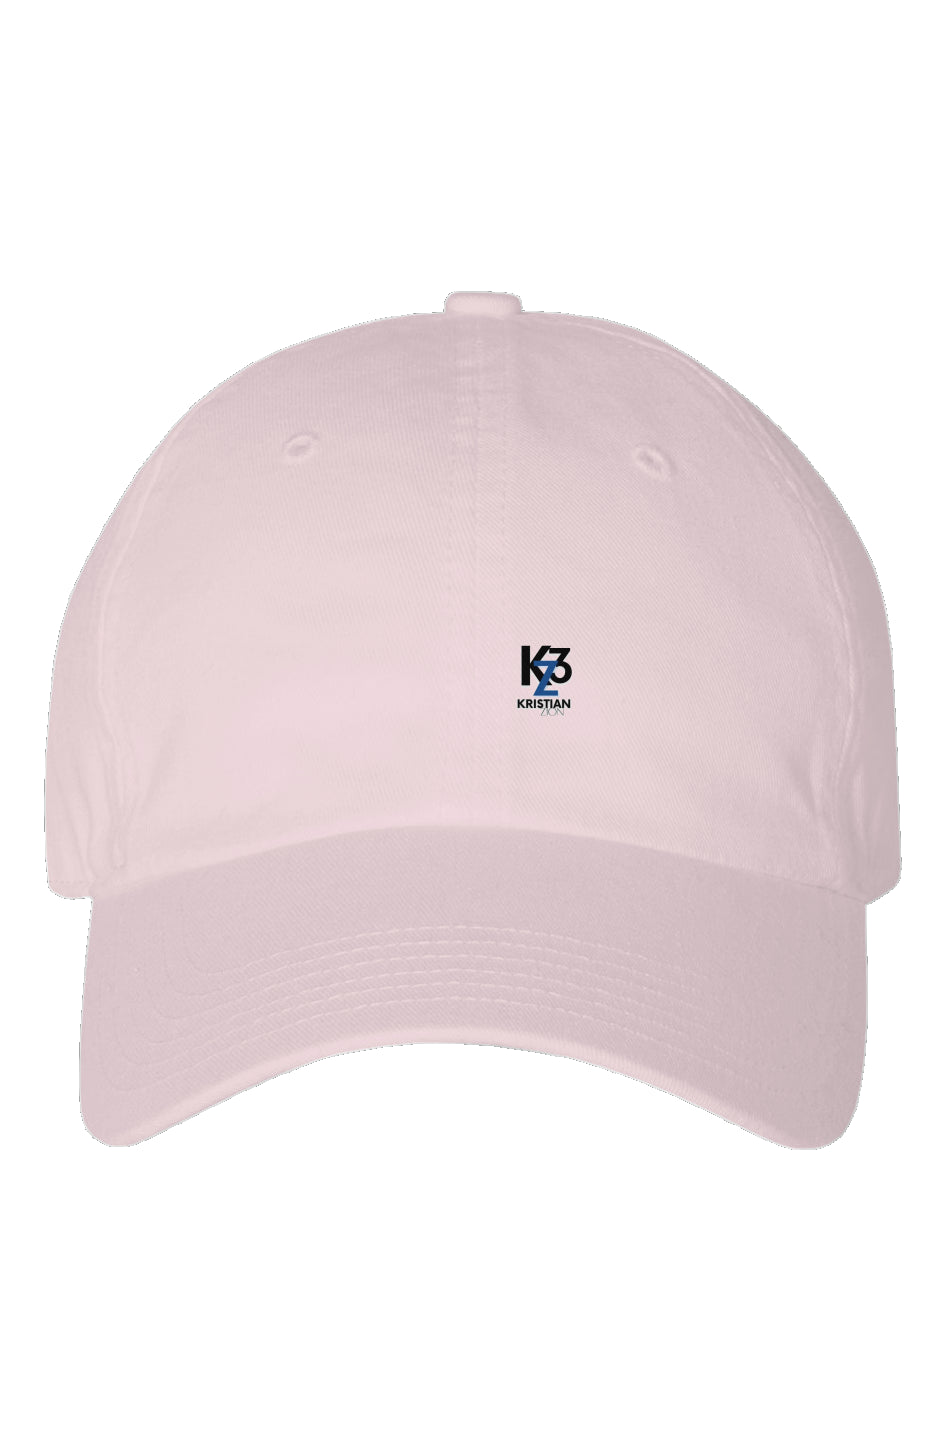 Youth Dad Hat